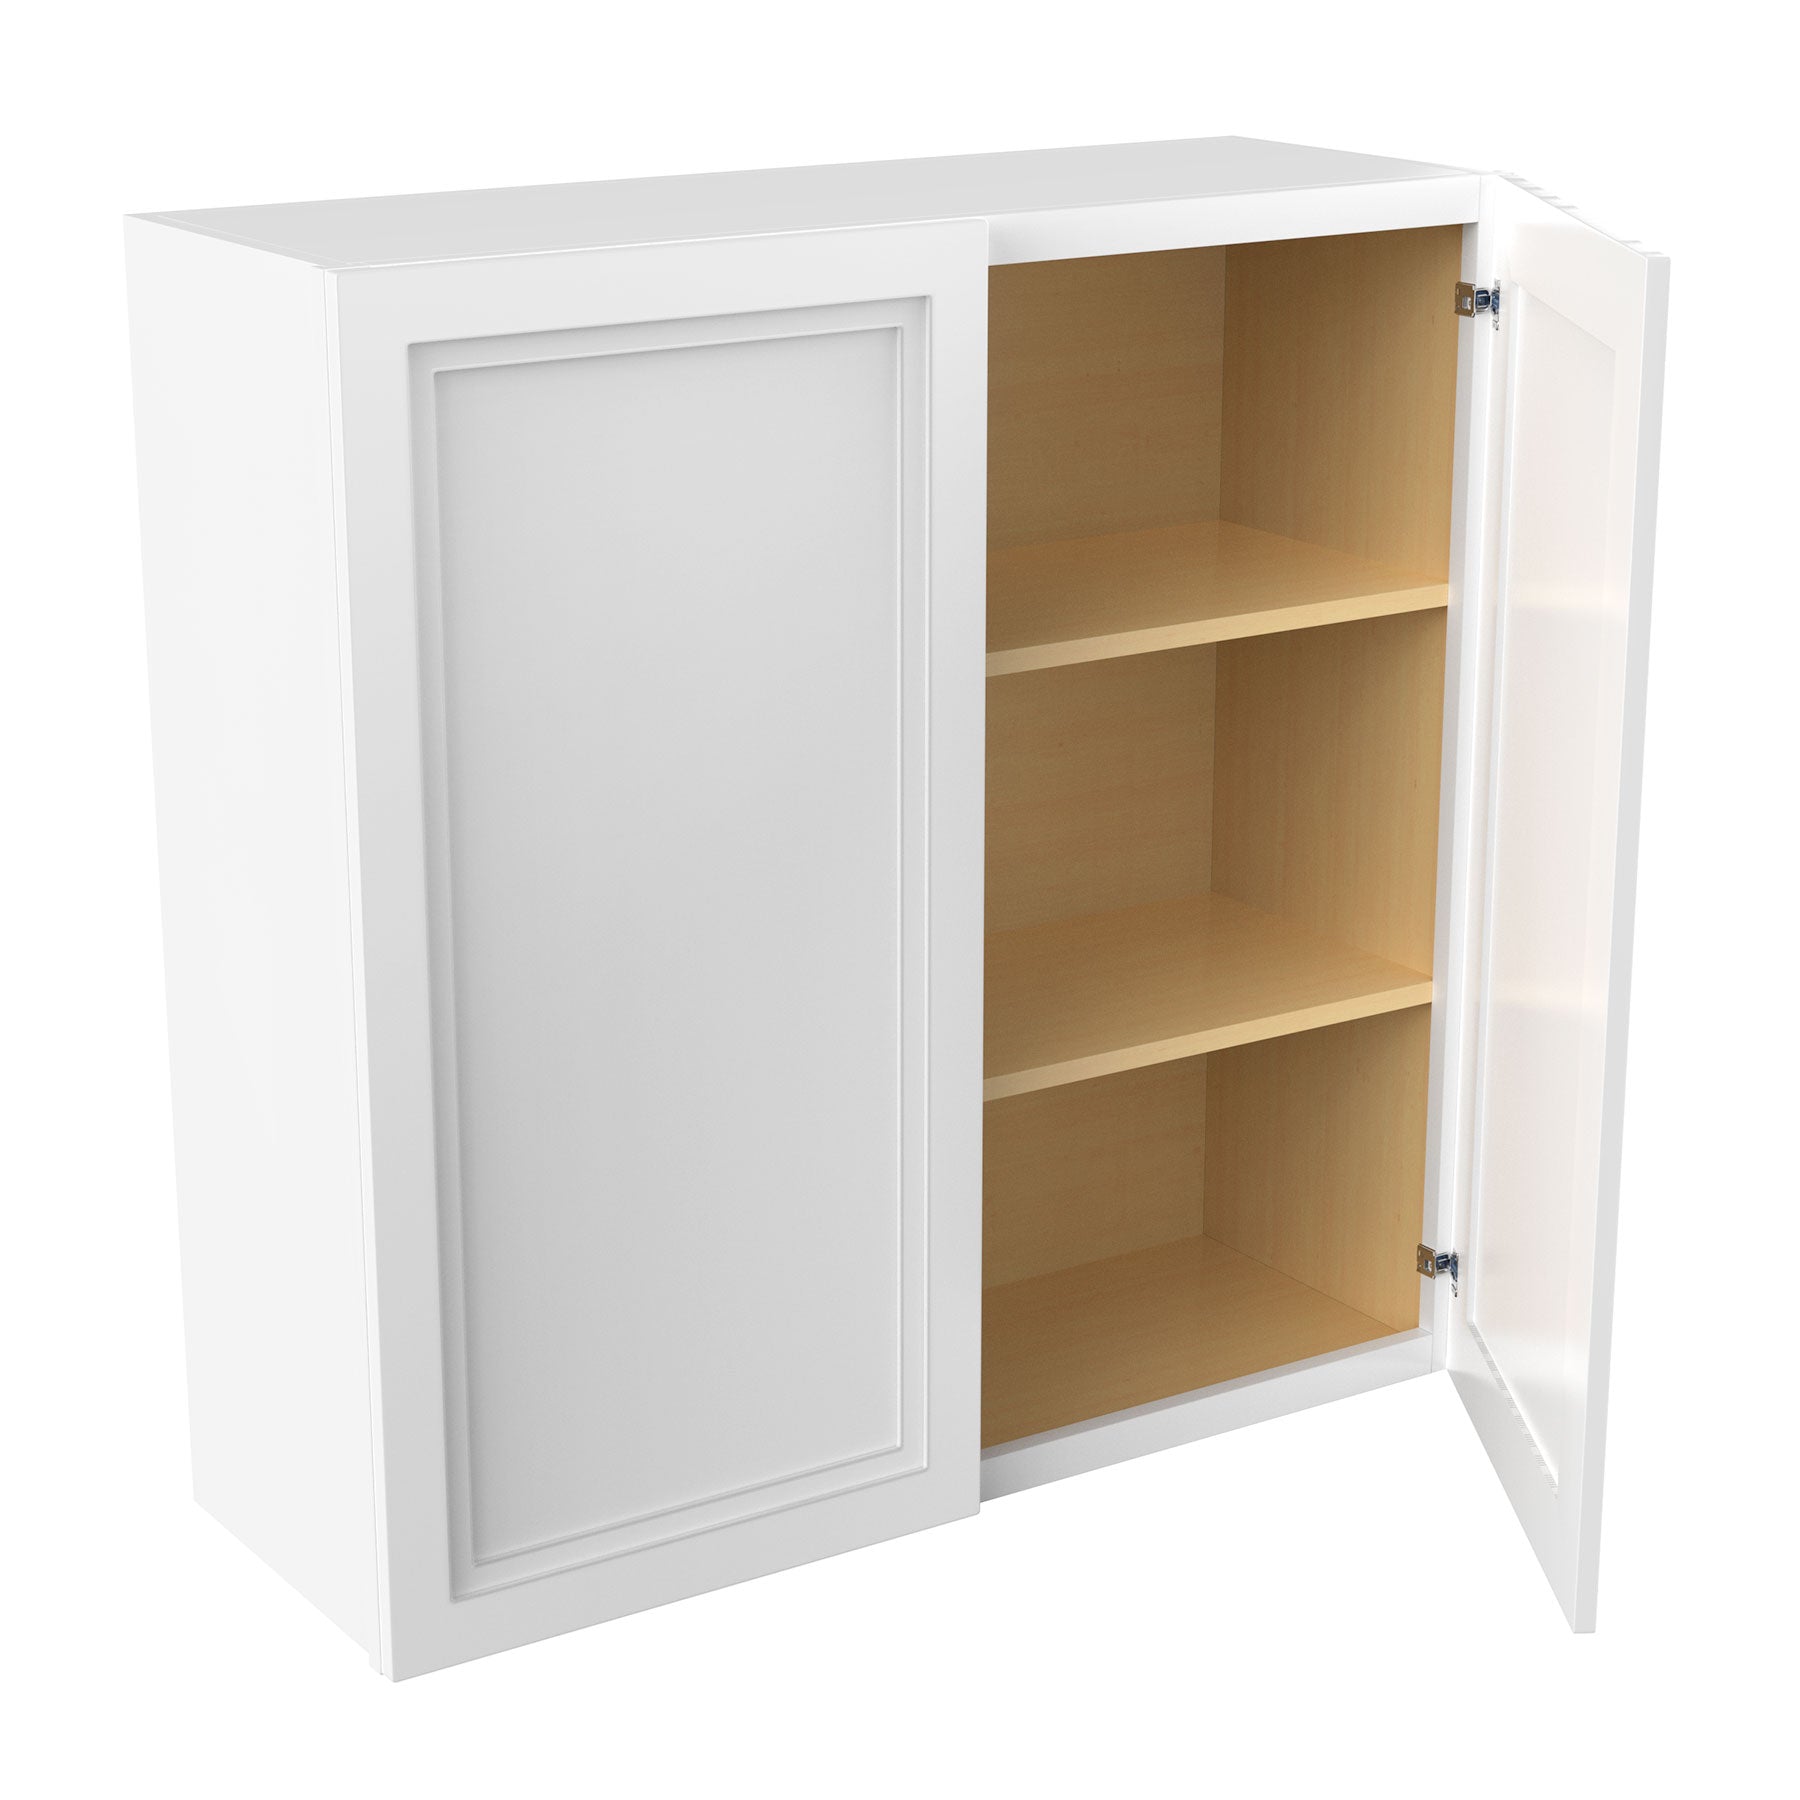 Fashion White - Double Door Wall Cabinet | 36"W x 36"H x 12"D